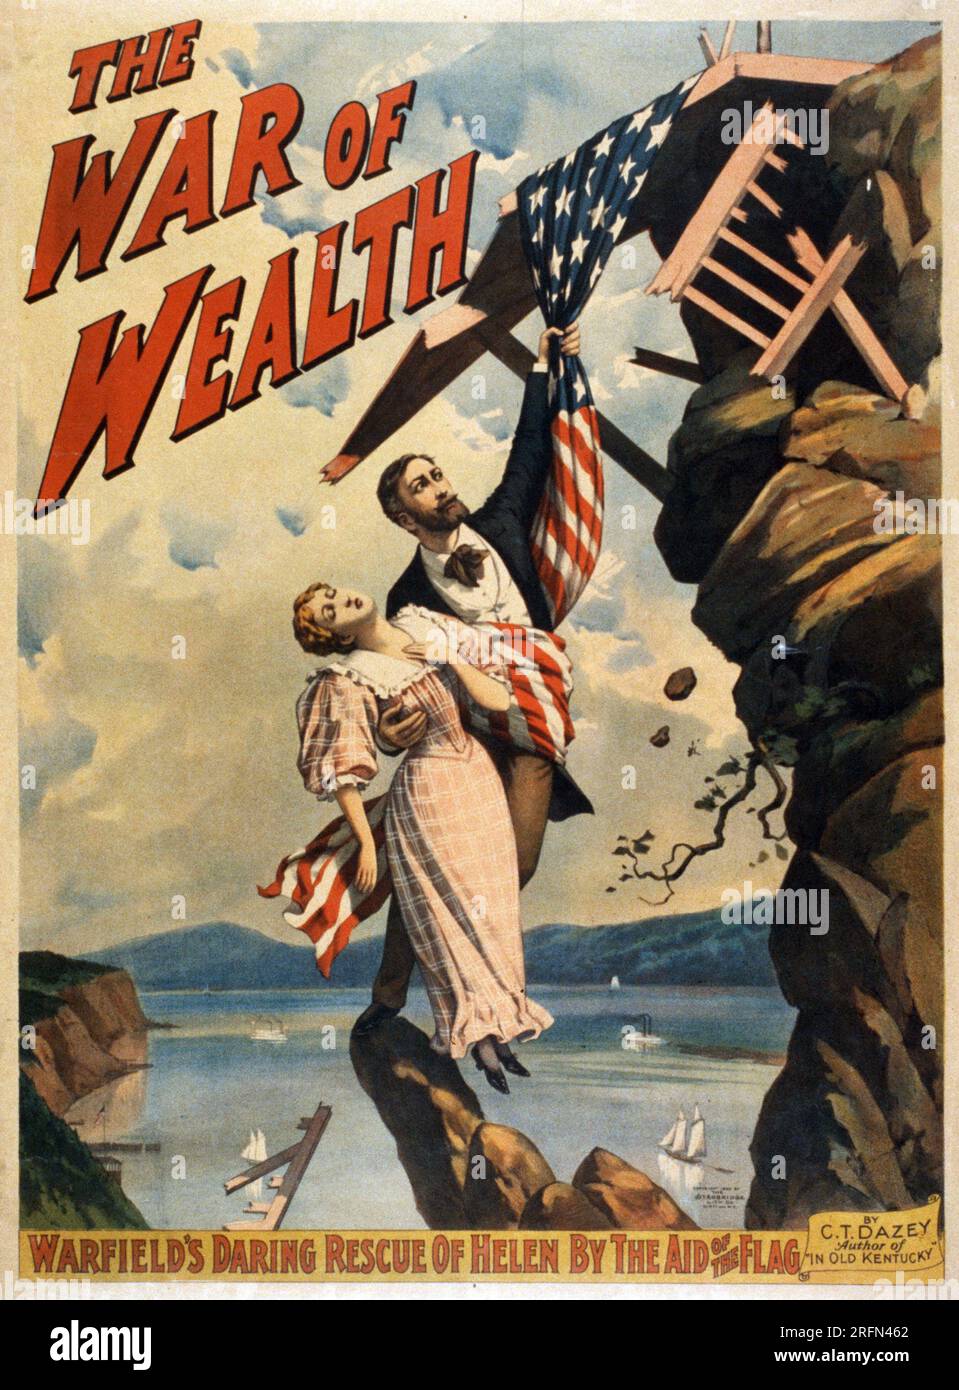 A poster advertising the theatrical production of The War on Wealth, by C.T. Dazey, from 1895. 'Warfield's daring rescue of Helen by the aid of the flag.' Stock Photo